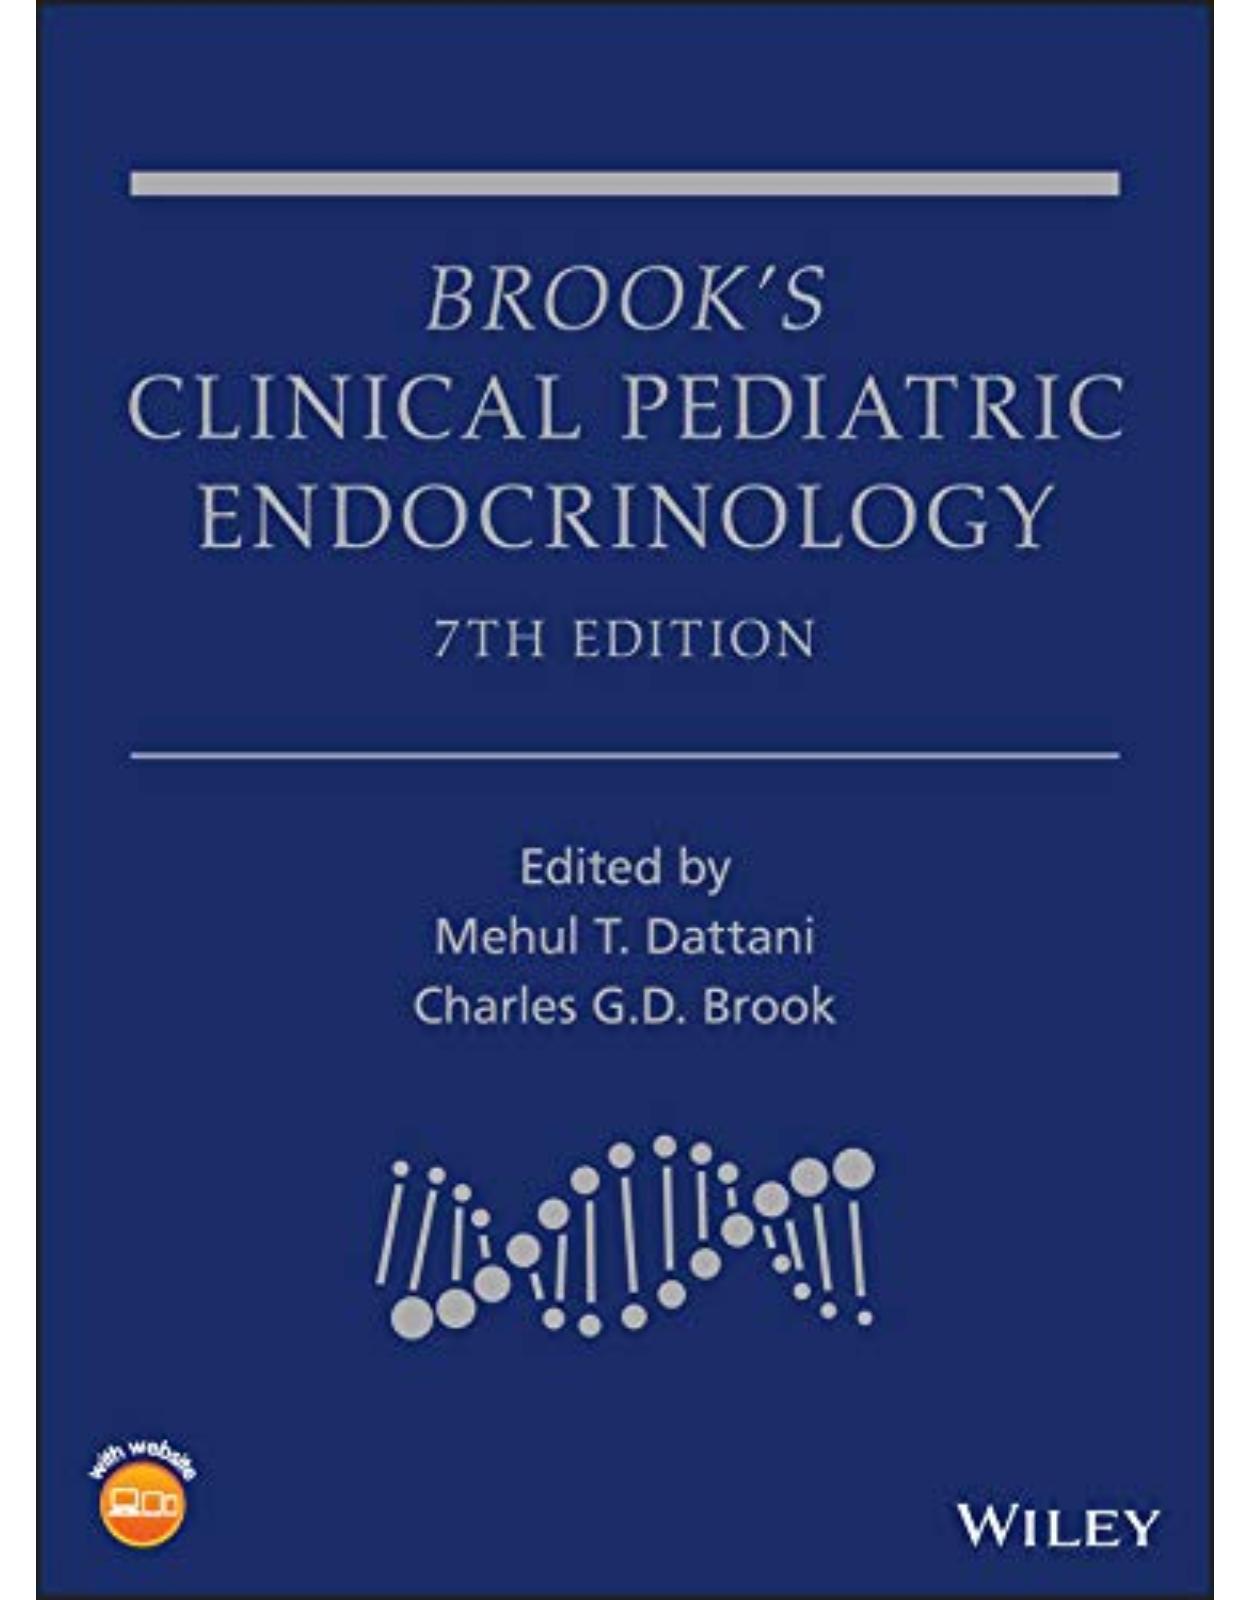 Brook’s Clinical Pediatric Endocrinology, 7th Edition